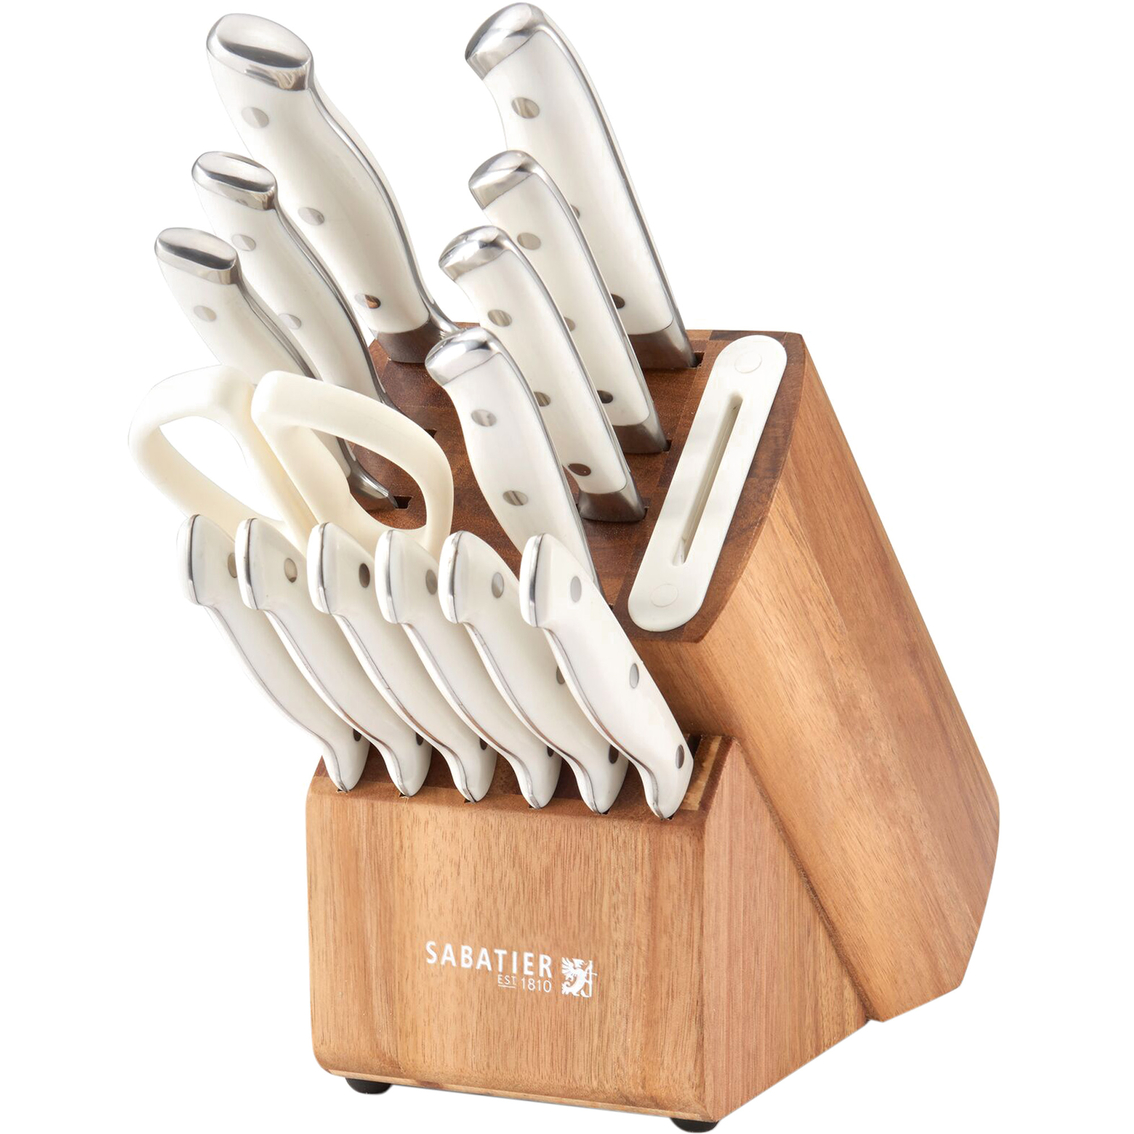 NEW 15 Piece Kitchen Knife Set with Block - household items - by